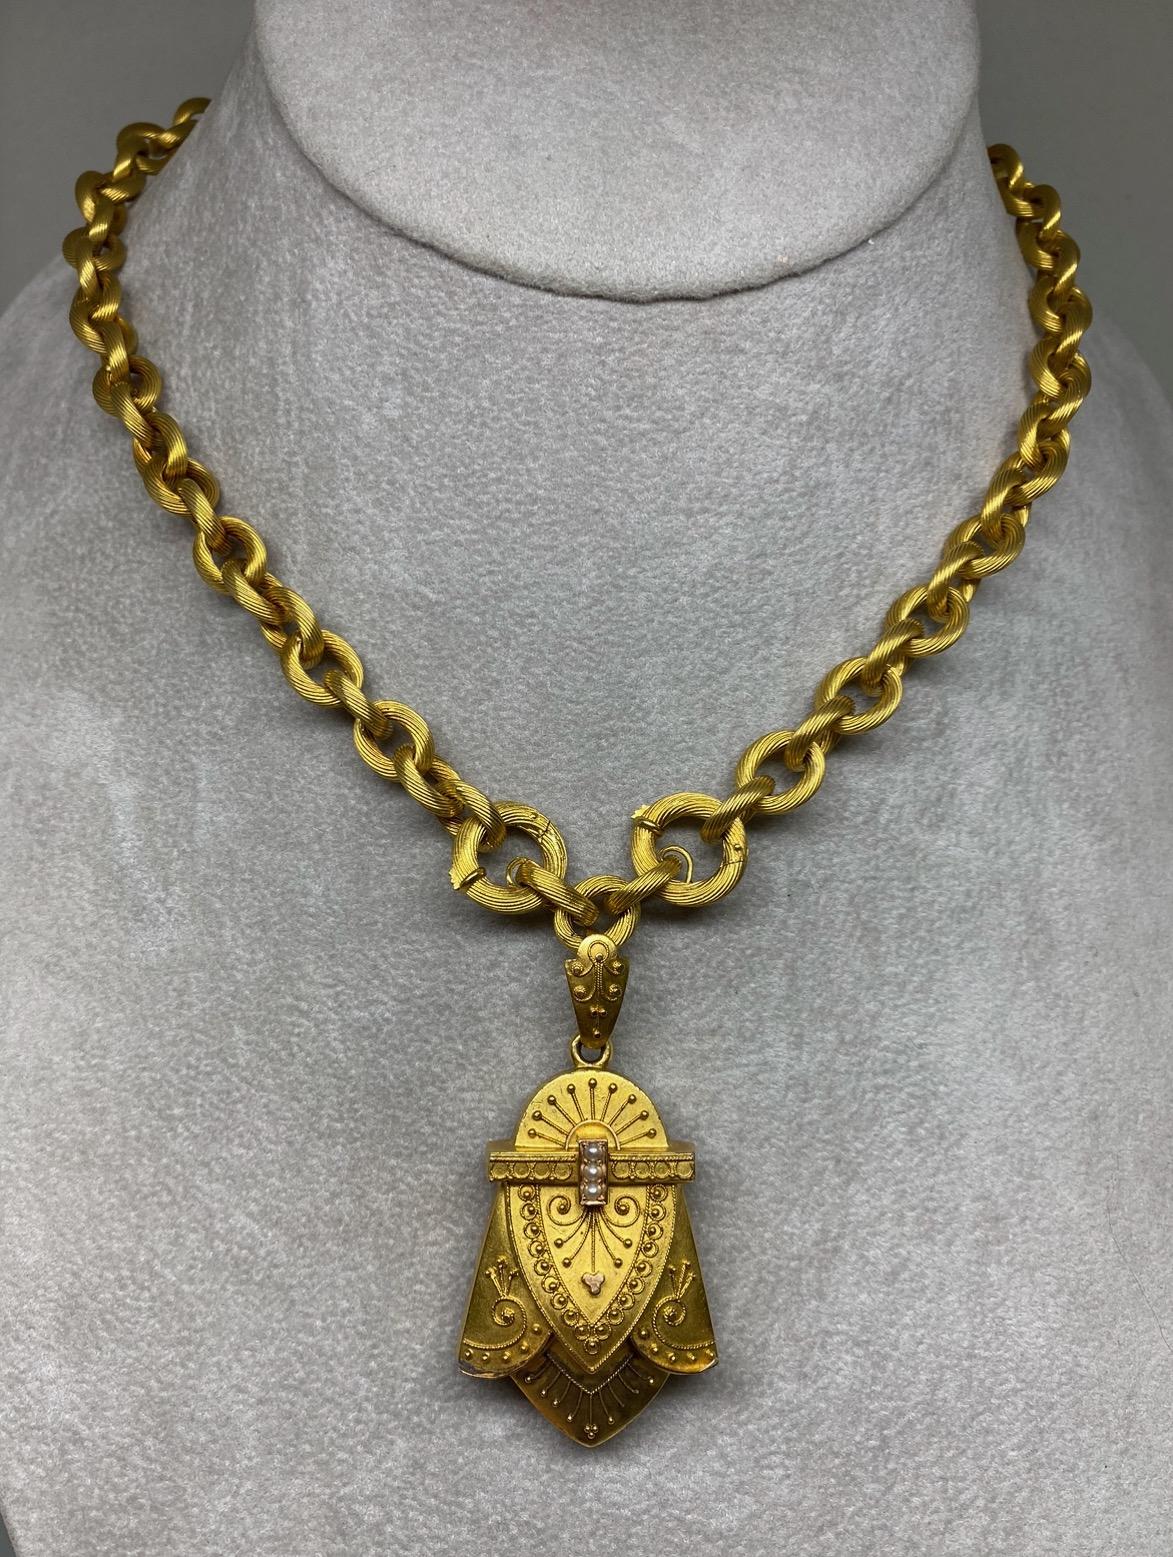 Dating back to the 1870s, this fabulous Victorian locket necklace, is artfully ornamented in consummate Etruscan Revival style.  The locket suspends from a very fine 20 inch chain made up of gold ribbed circle links. A rare find to have both the